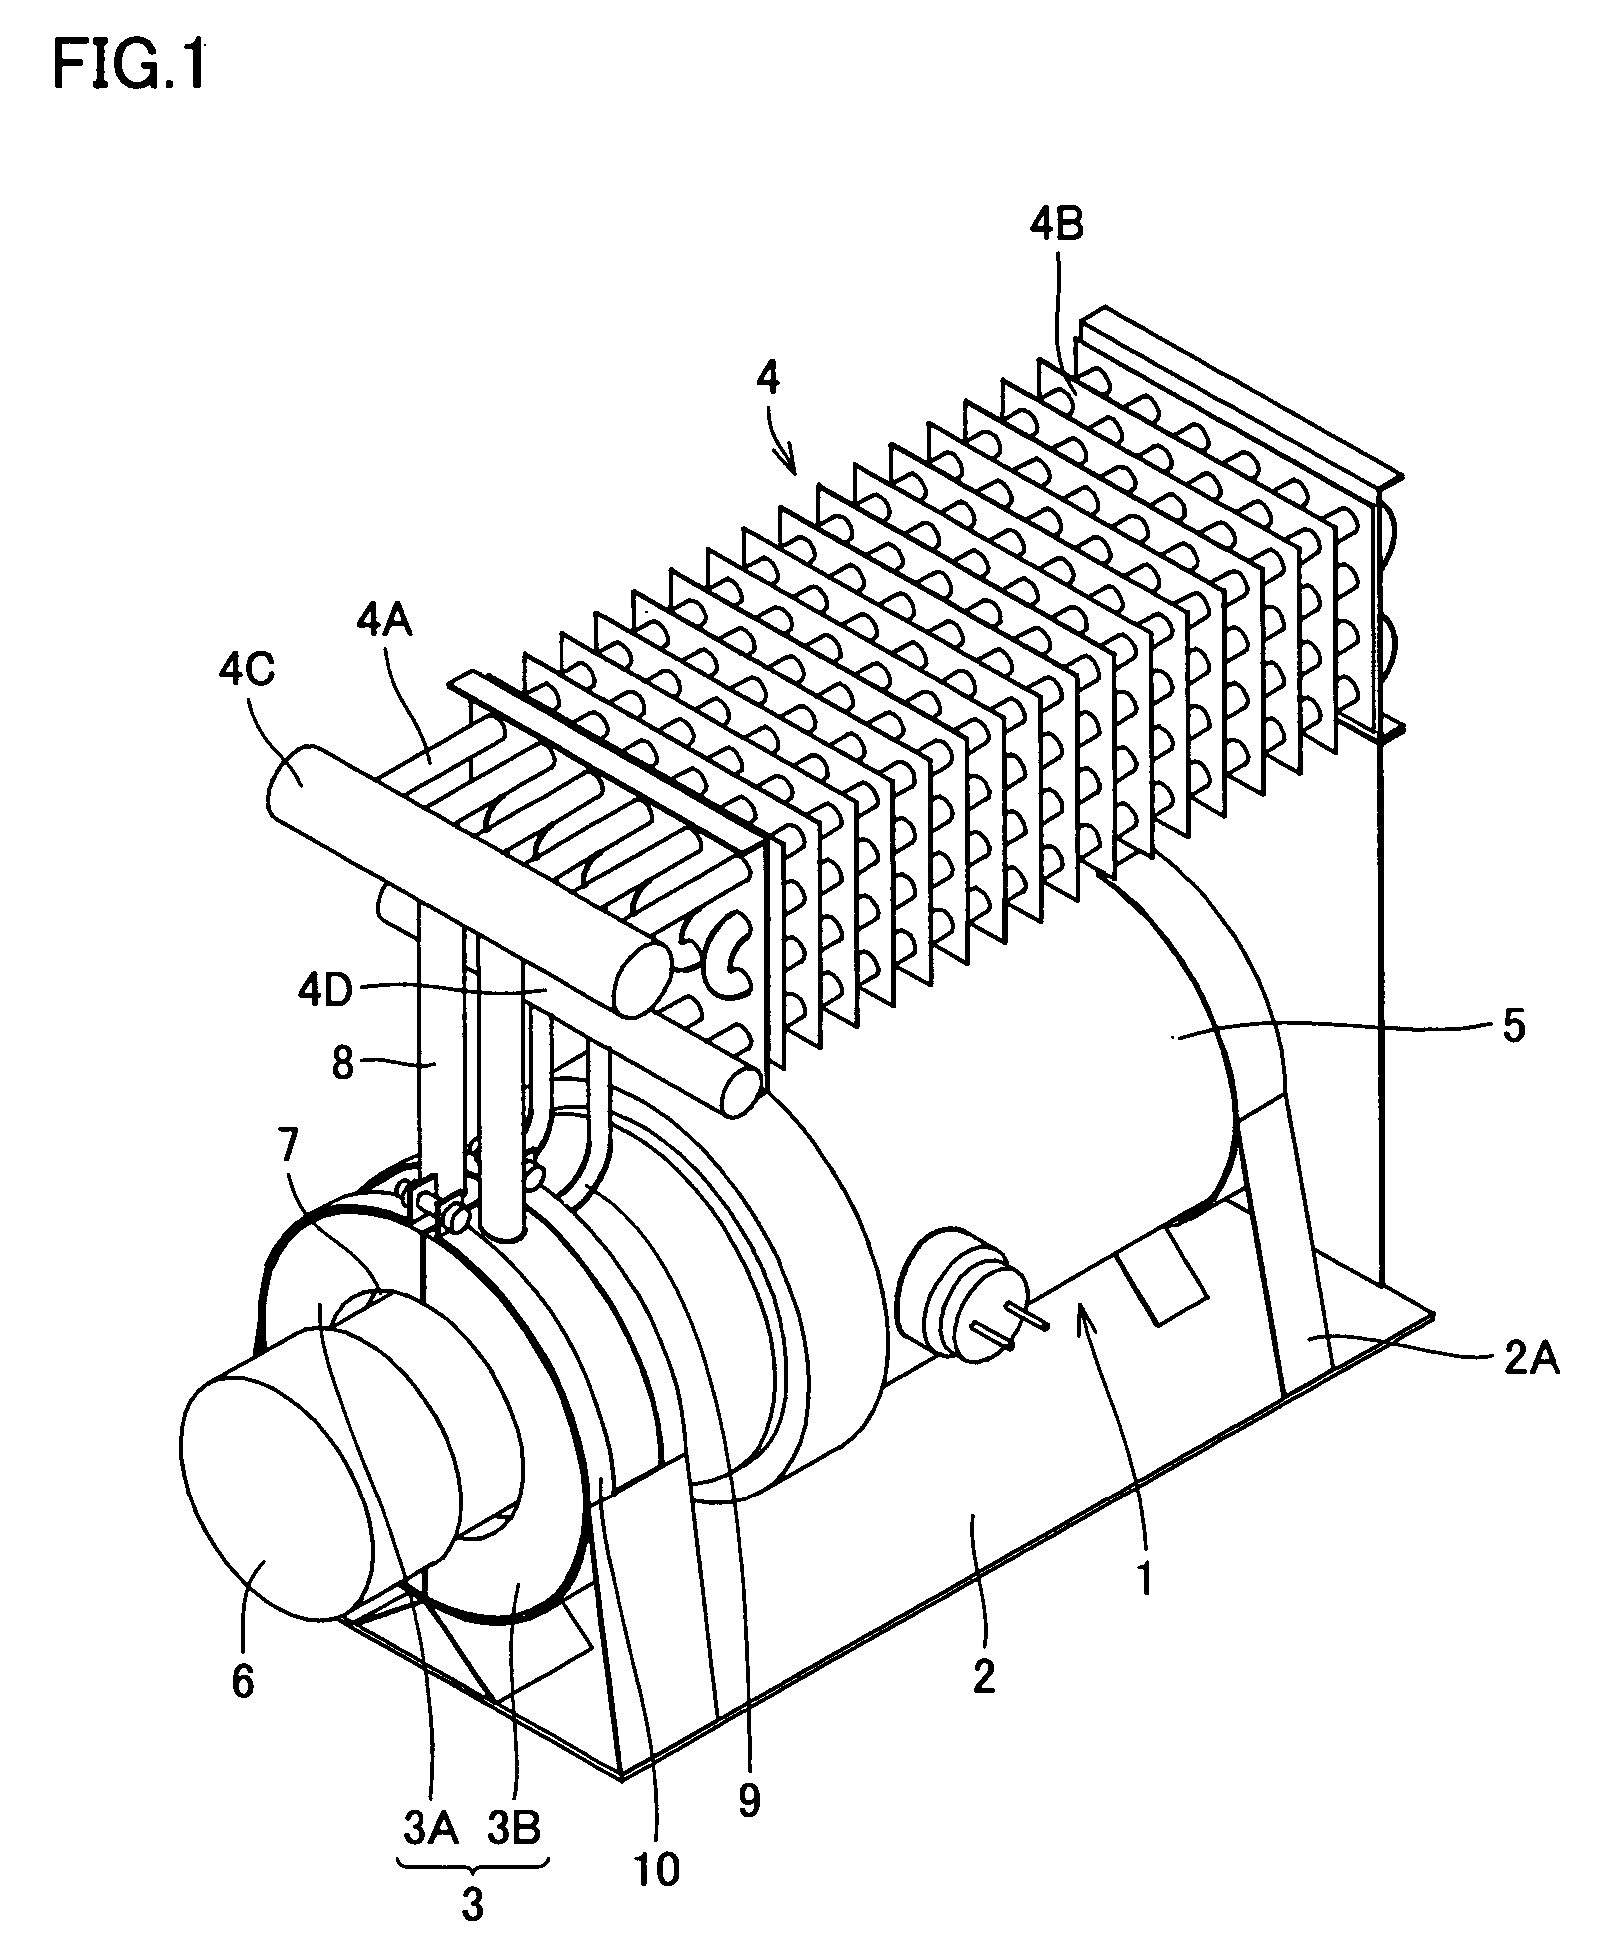 Loop type thermo syphone, heat radiation system, heat exchange system, and stirling cooling chamber